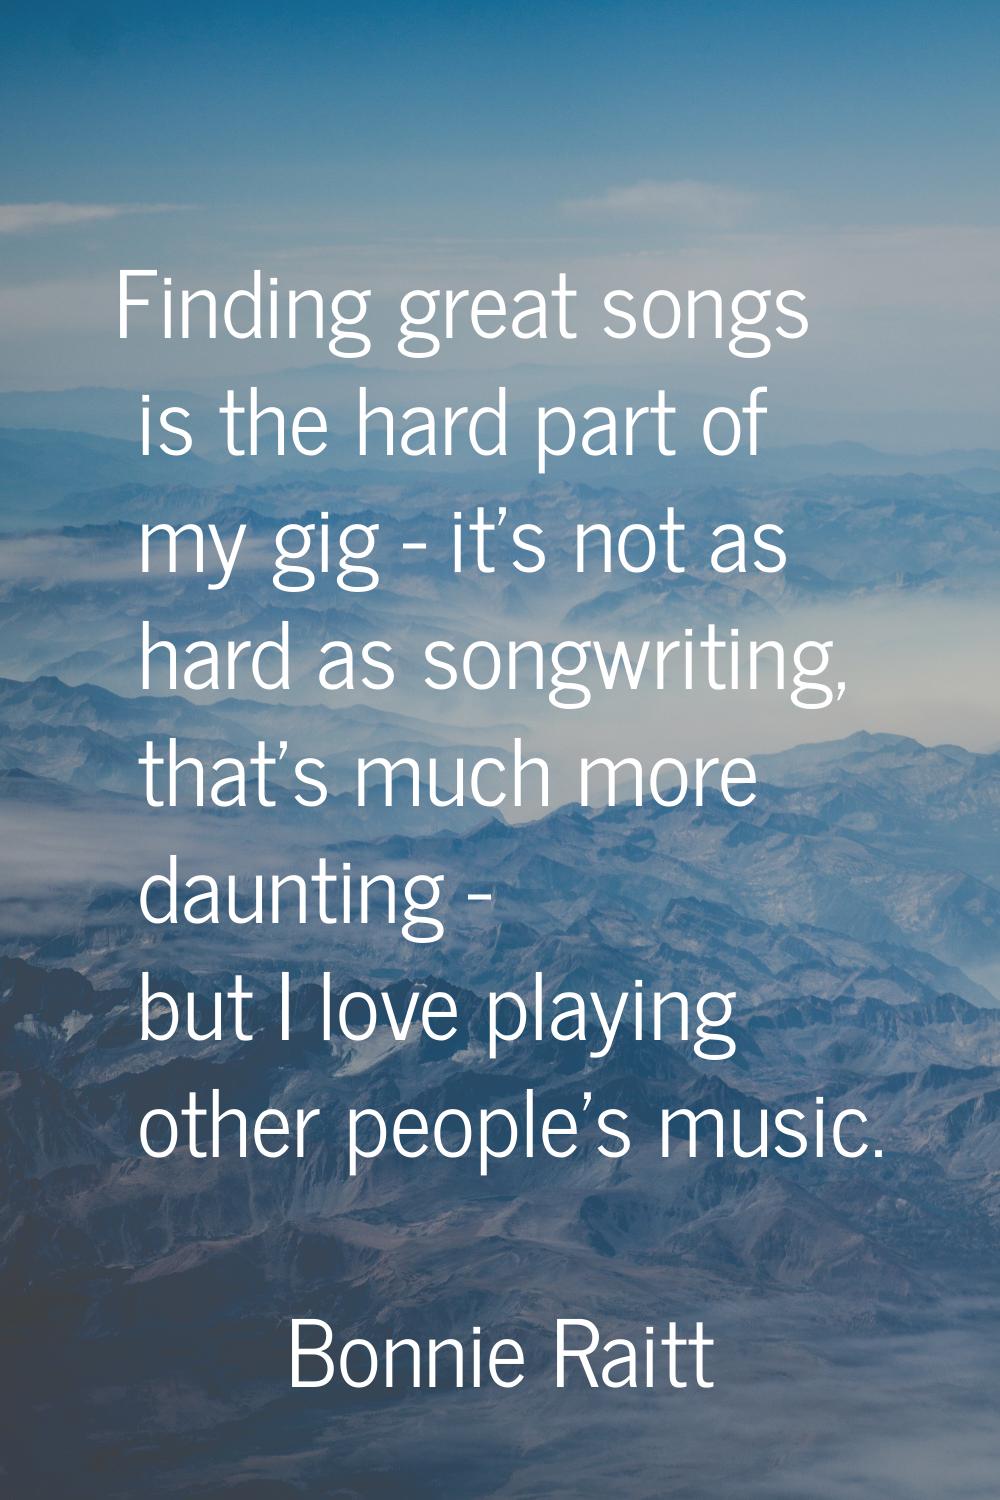 Finding great songs is the hard part of my gig - it's not as hard as songwriting, that's much more 